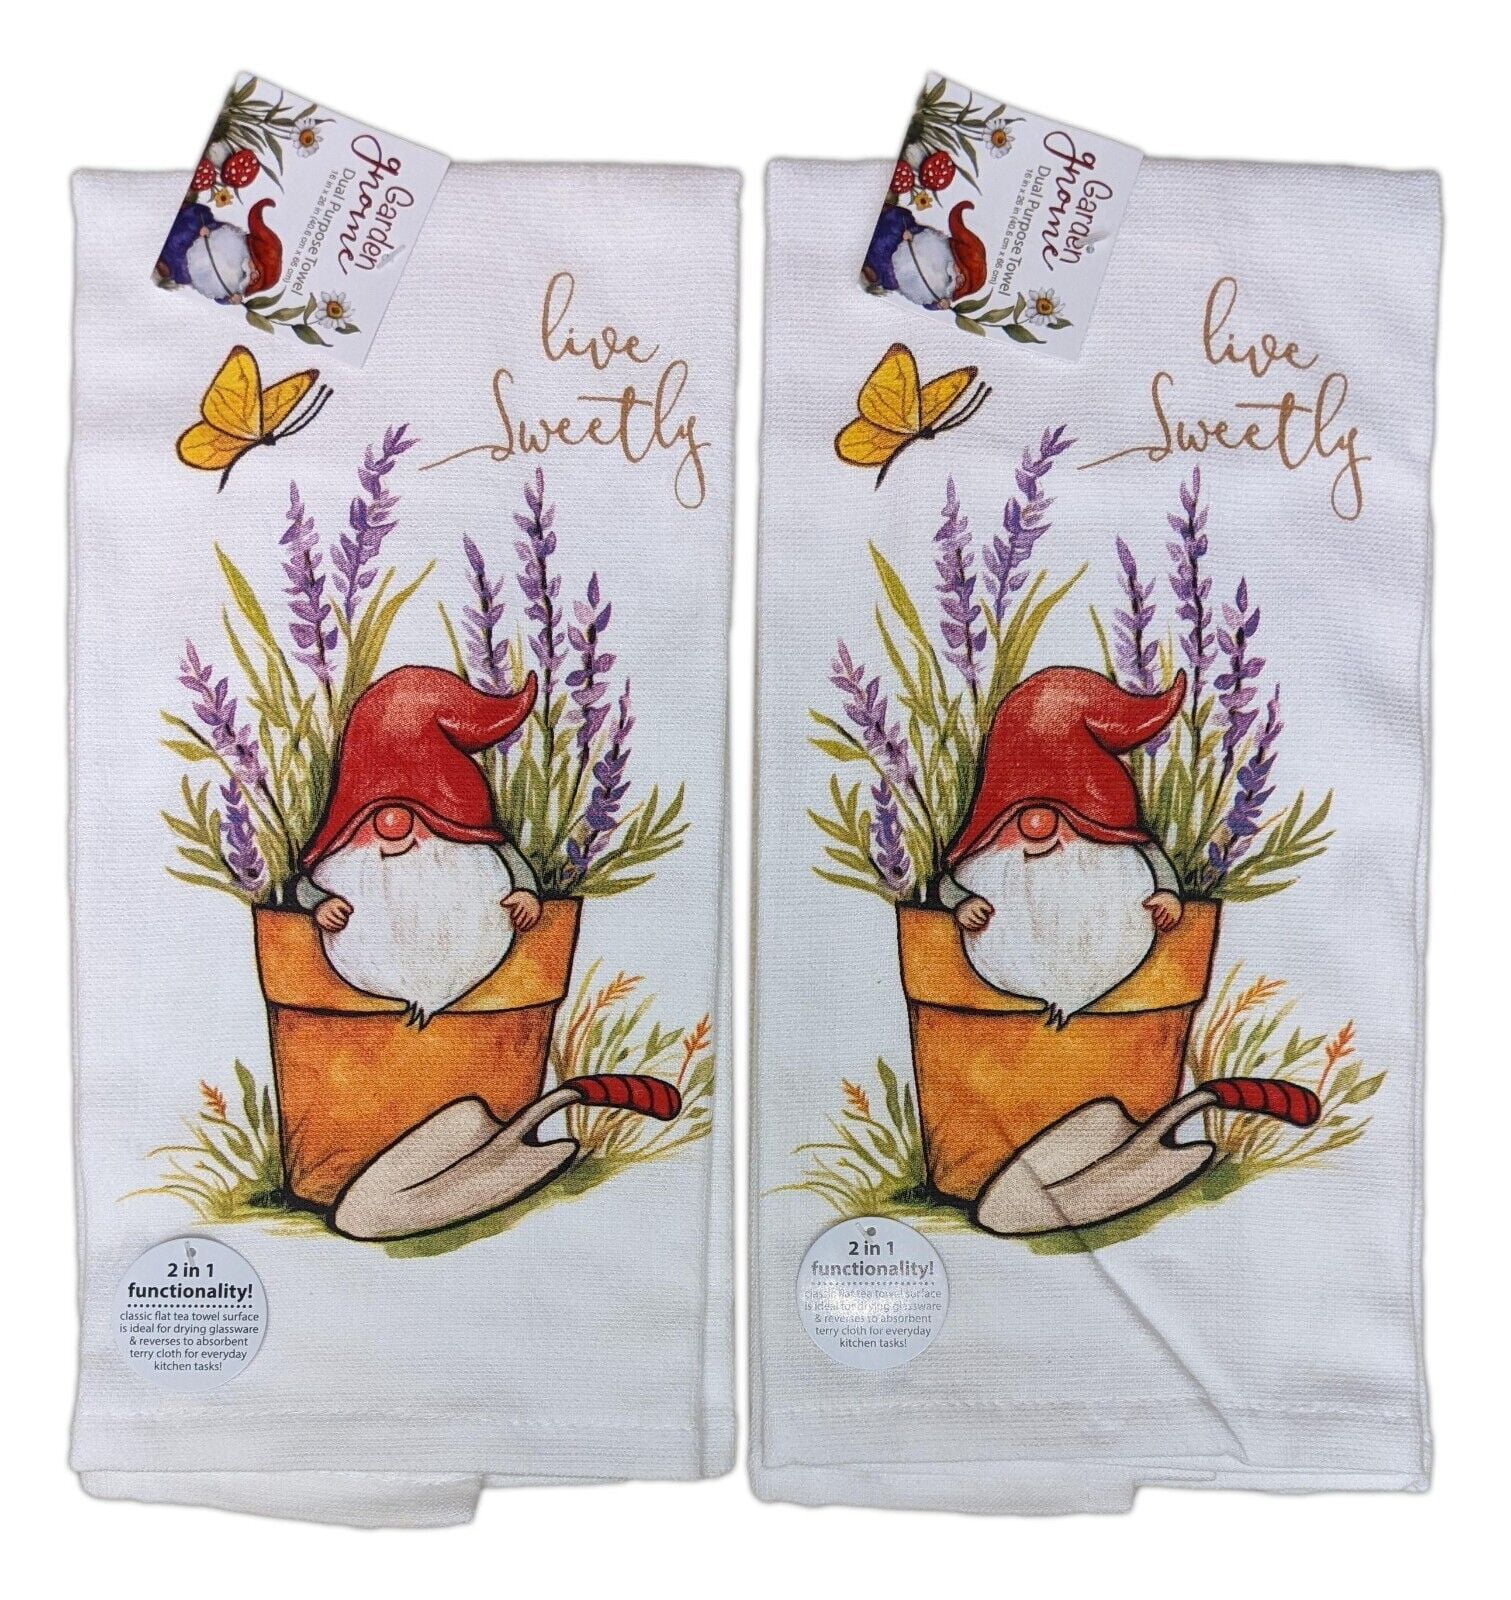 Kay Dee Designs Indigo Solid Terry Kitchen Towel (2-Pack) - Tiger